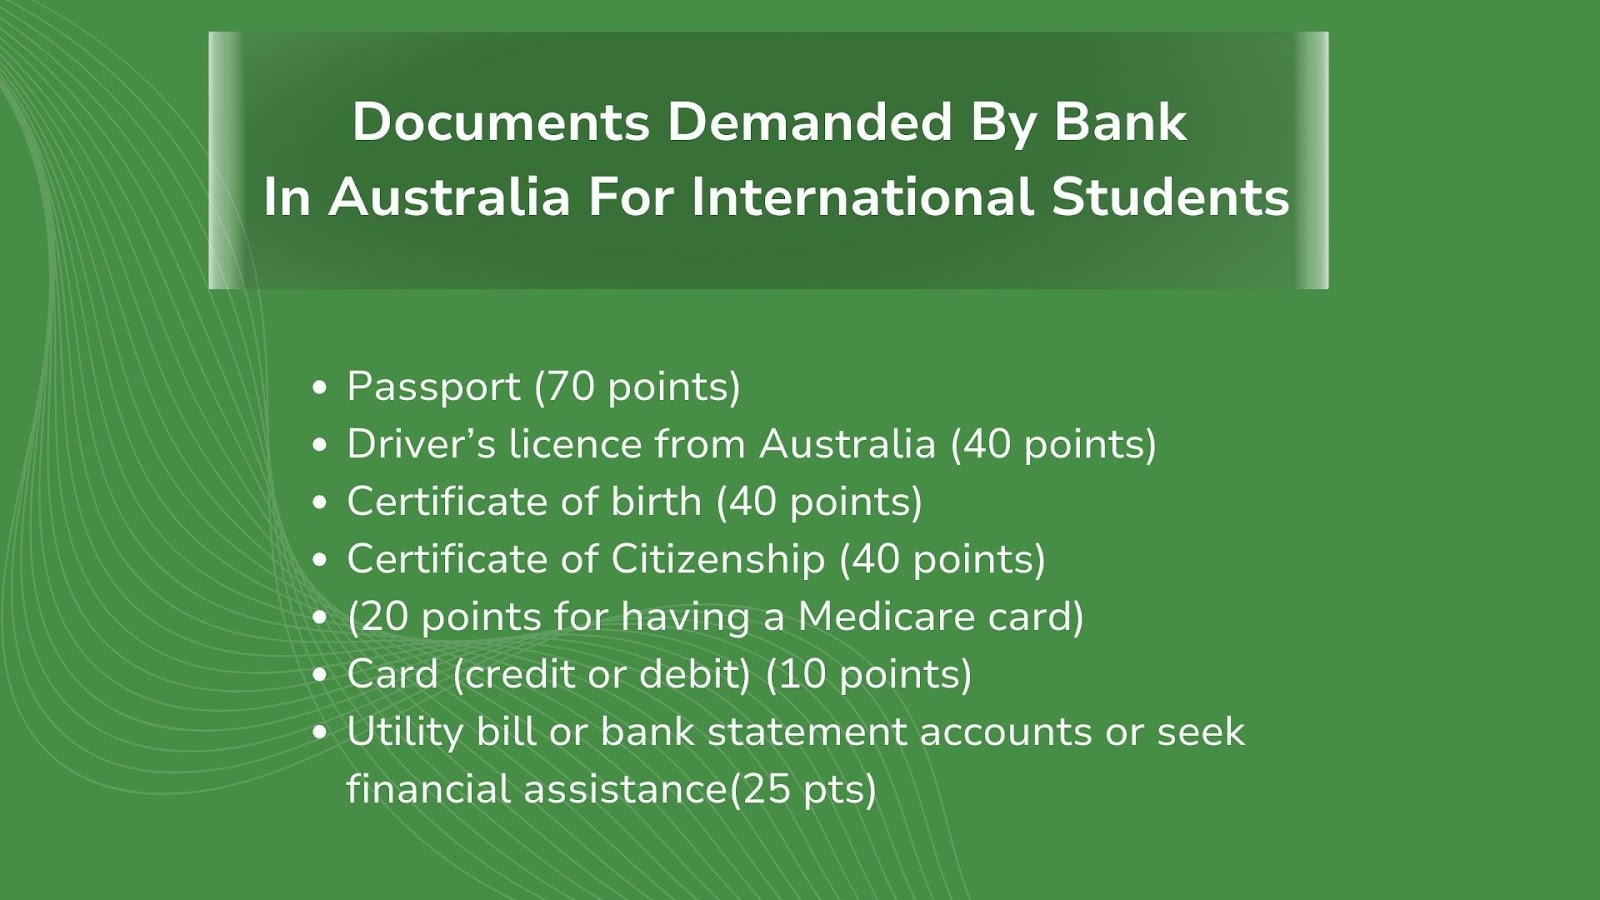 Documents demanded by banks in Australia from international students.